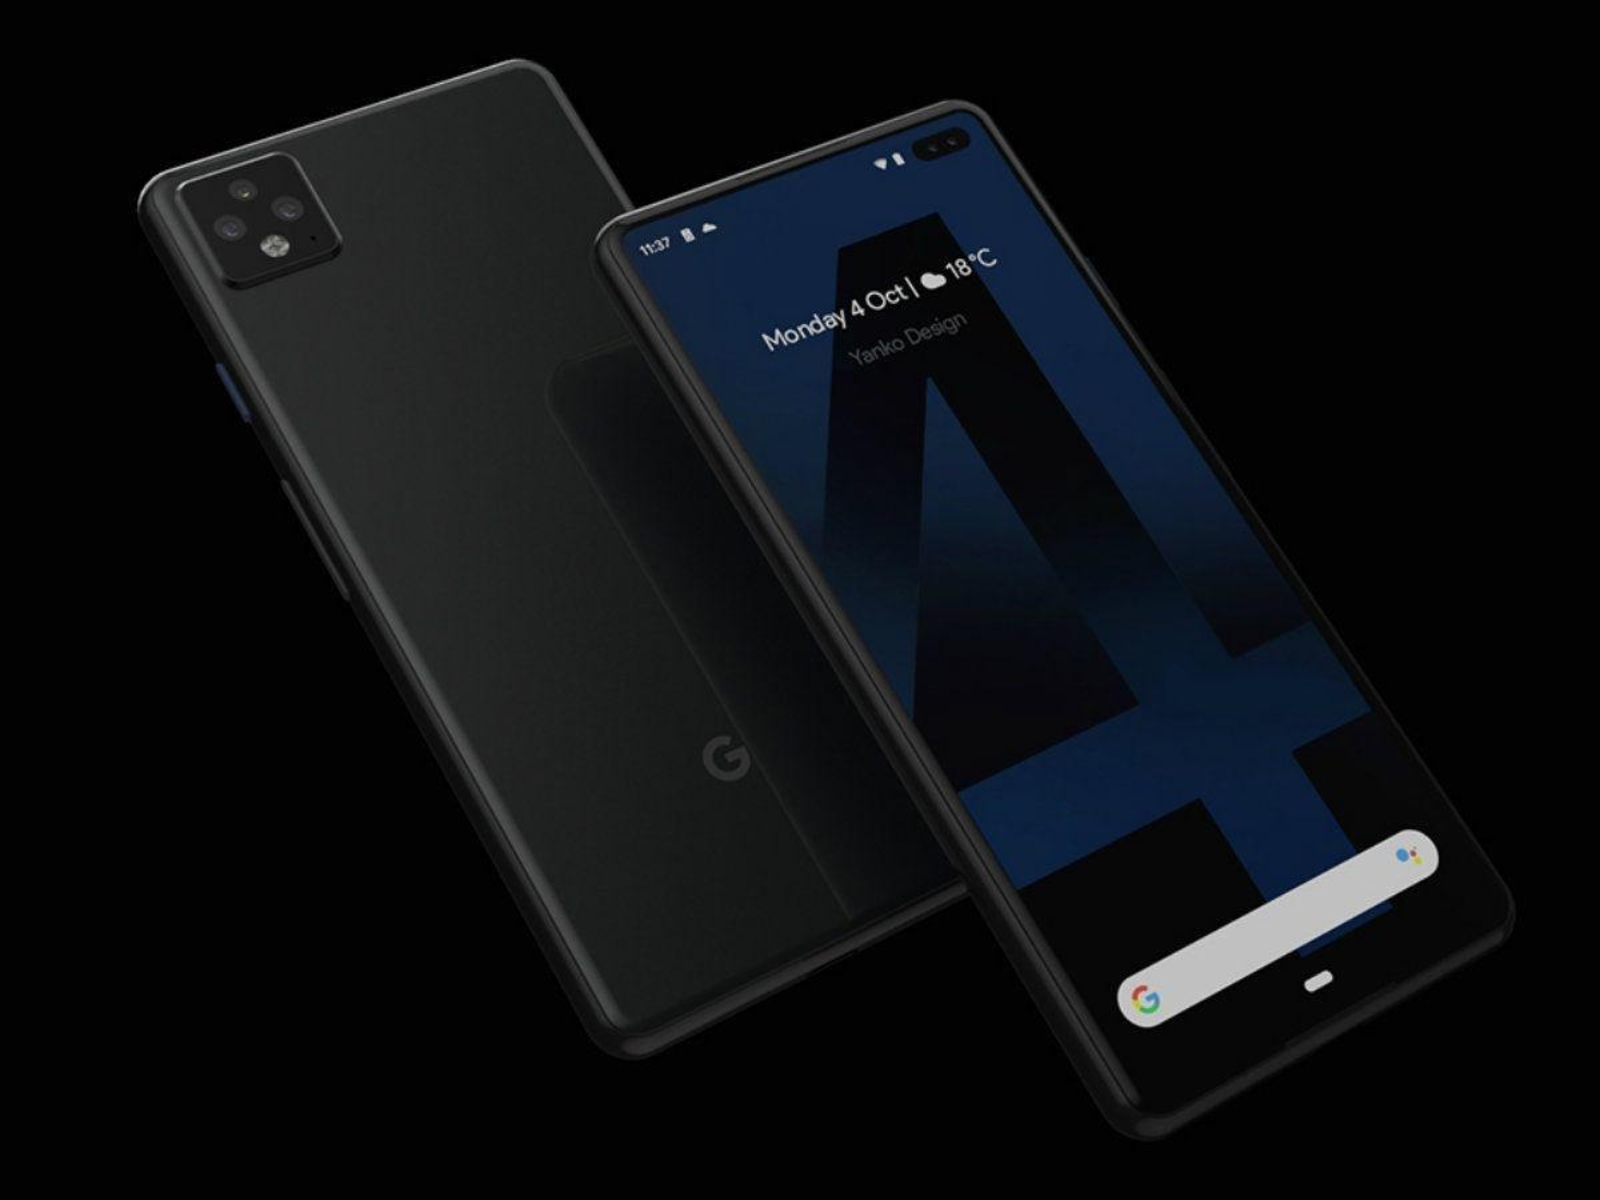 Anticipating The Release: When Will Google Pixel 4 Be Available